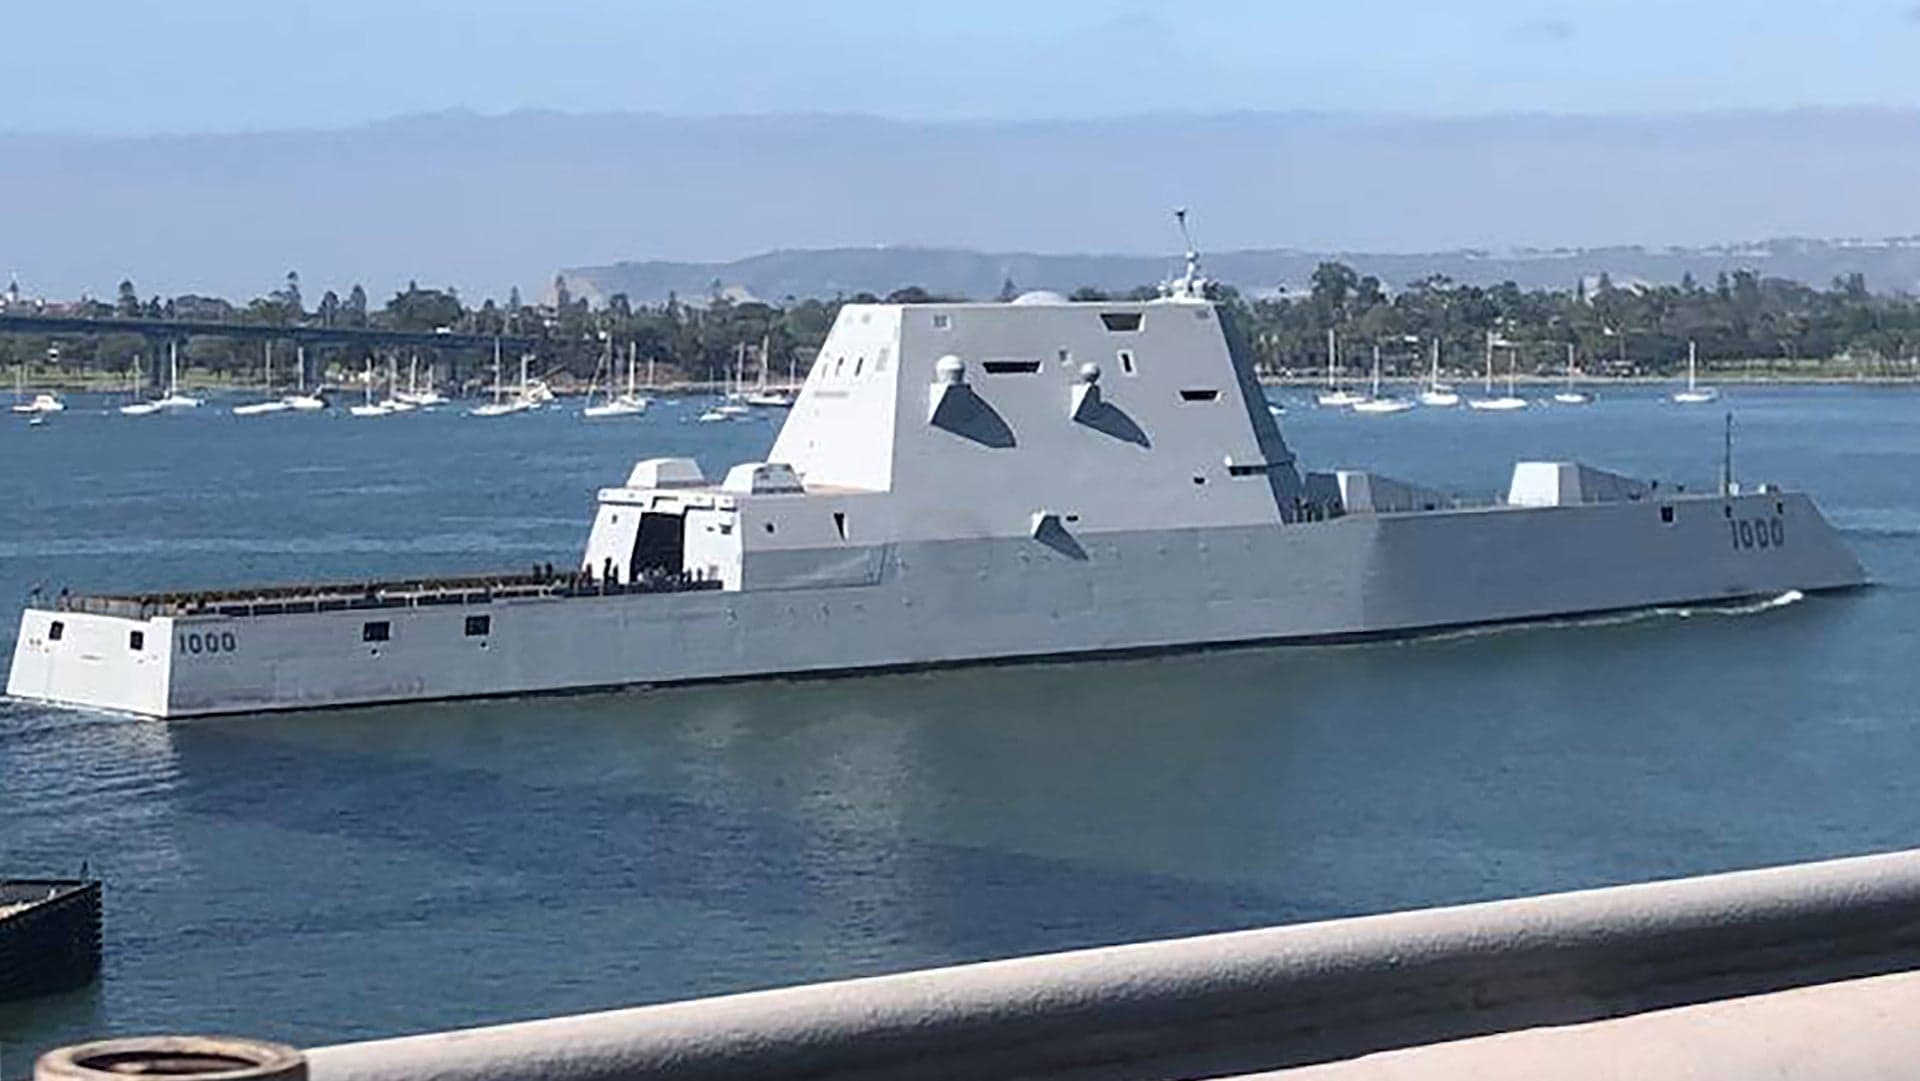 Navy’s Revamped Stealth Destroyer Looks Less Stealthy As It Leaves San Diego For Trials